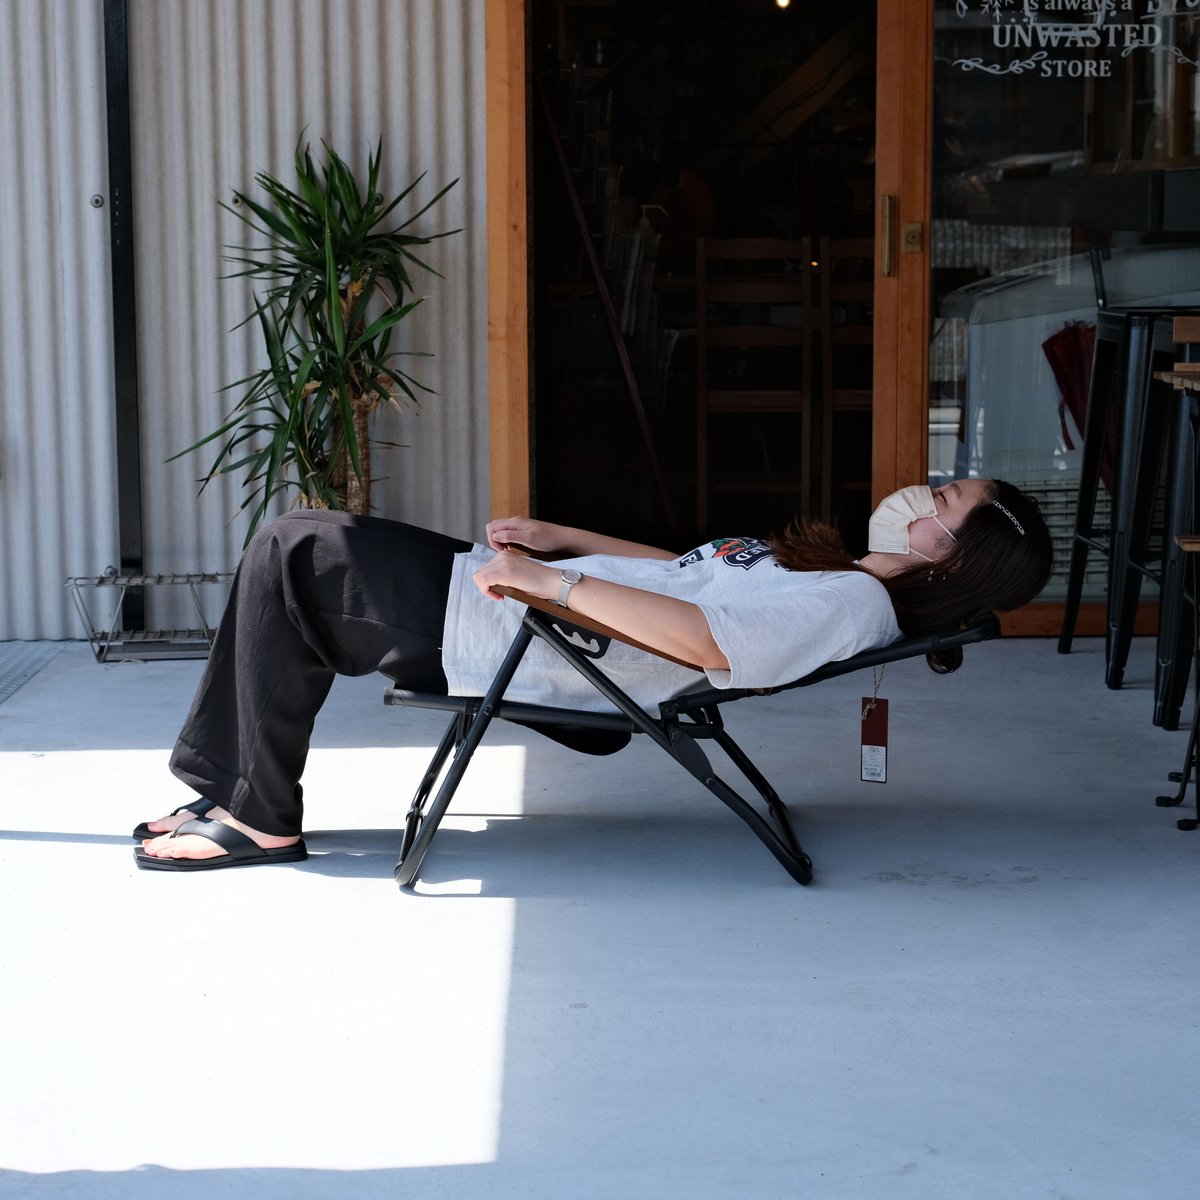 <AS2OV> RECLINING LOW ROVER CHAIR【BLACK】 | UNWA...